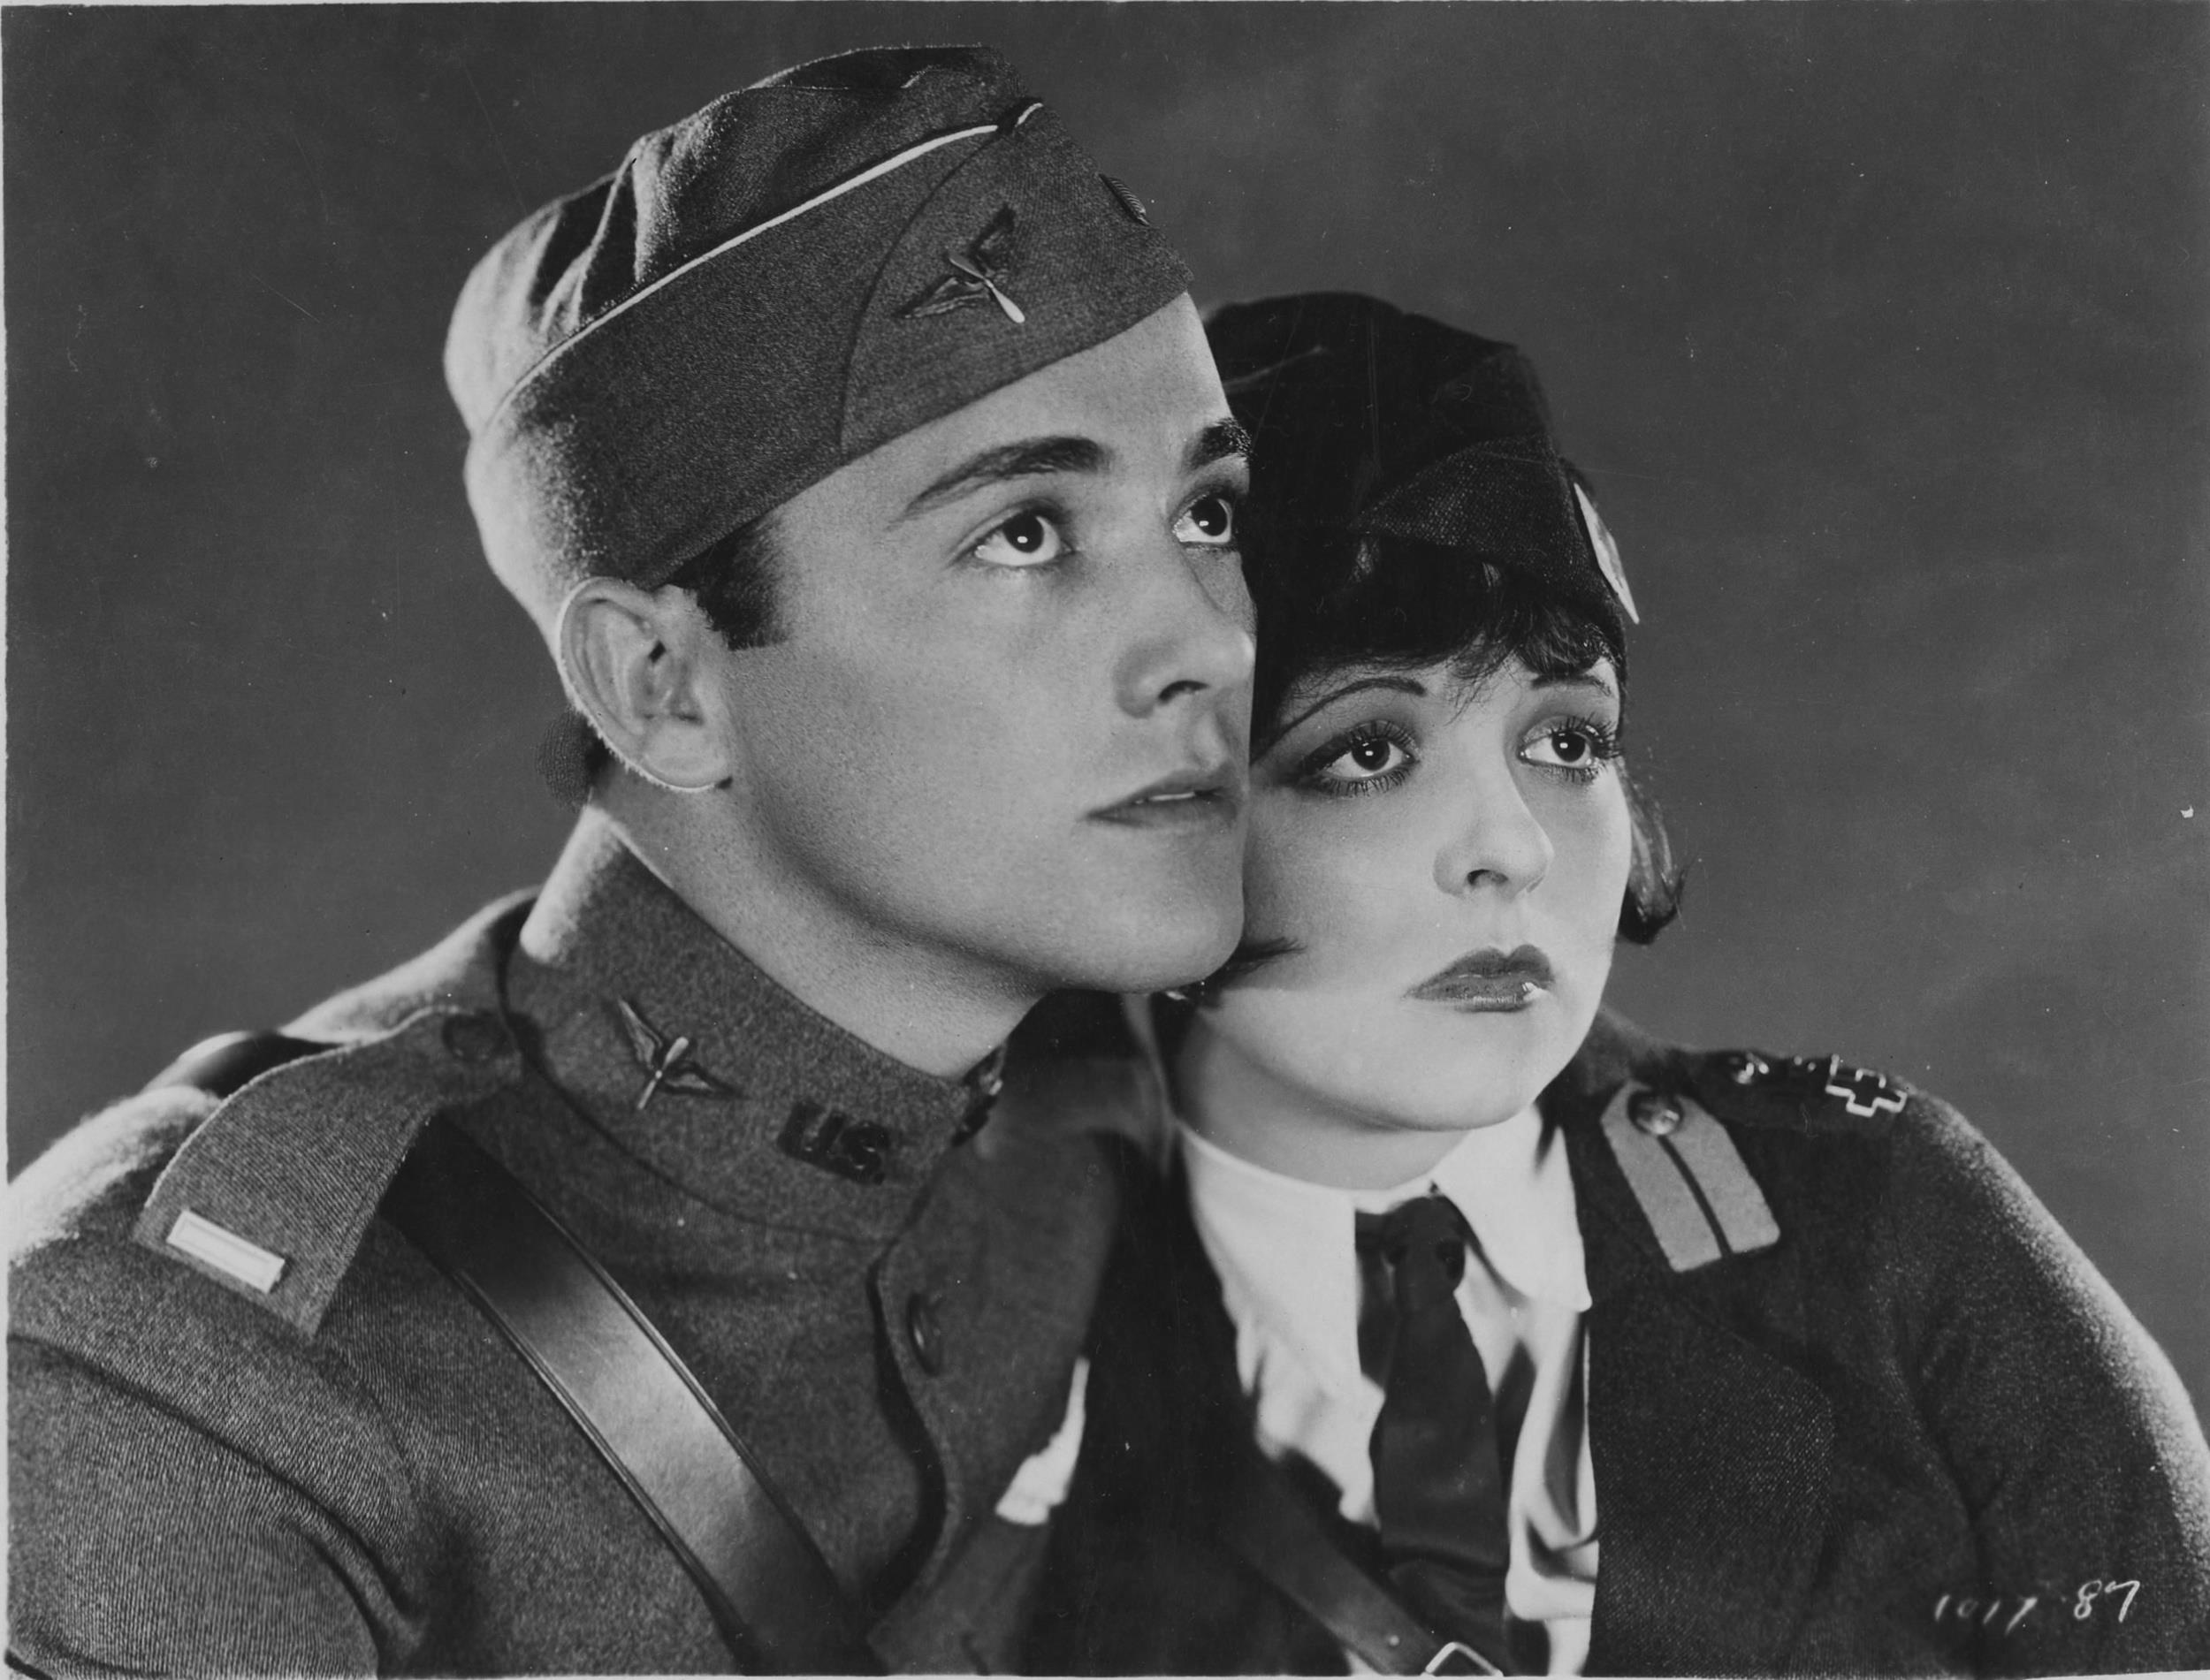 <p>“Wings” is a true piece of cinema history. Specifically, the World War I film was the first movie to win Best Picture at the Academy Awards. It’s also the one true silent film to win Best Picture, as “The Artist” doesn’t really count. Fortunately, despite being almost a century old at this point, “Wings” has been preserved for posterity.</p><p>You may also like: <a href='https://www.yardbarker.com/entertainment/articles/20_facts_you_might_not_know_about_gladiator_030424/s1__35259995'>20 facts you might not know about 'Gladiator'</a></p>